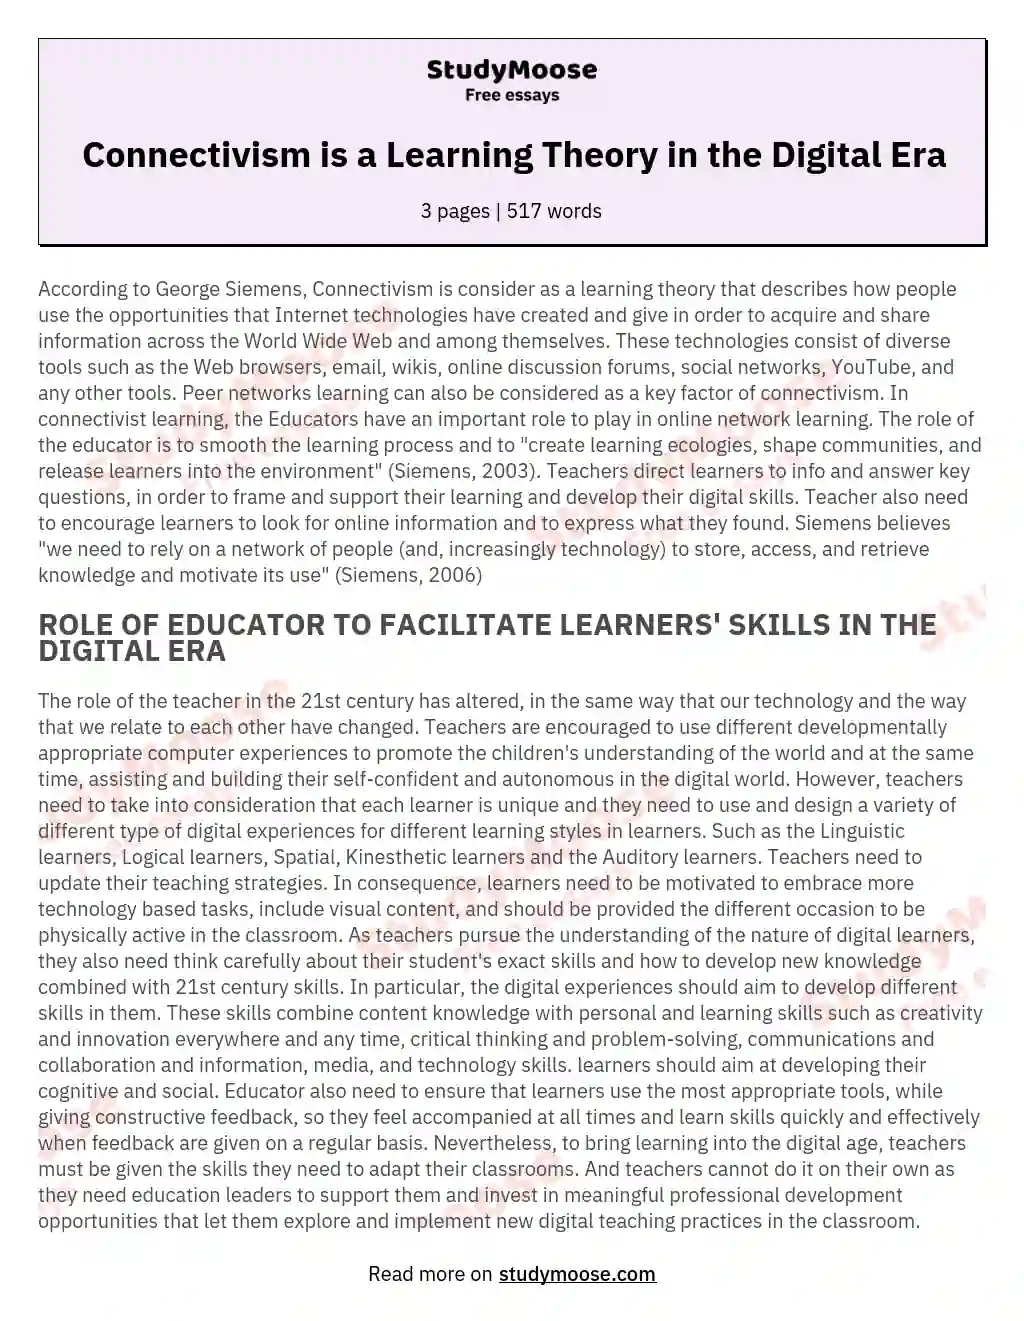 Connectivism is a Learning Theory in the Digital Era essay